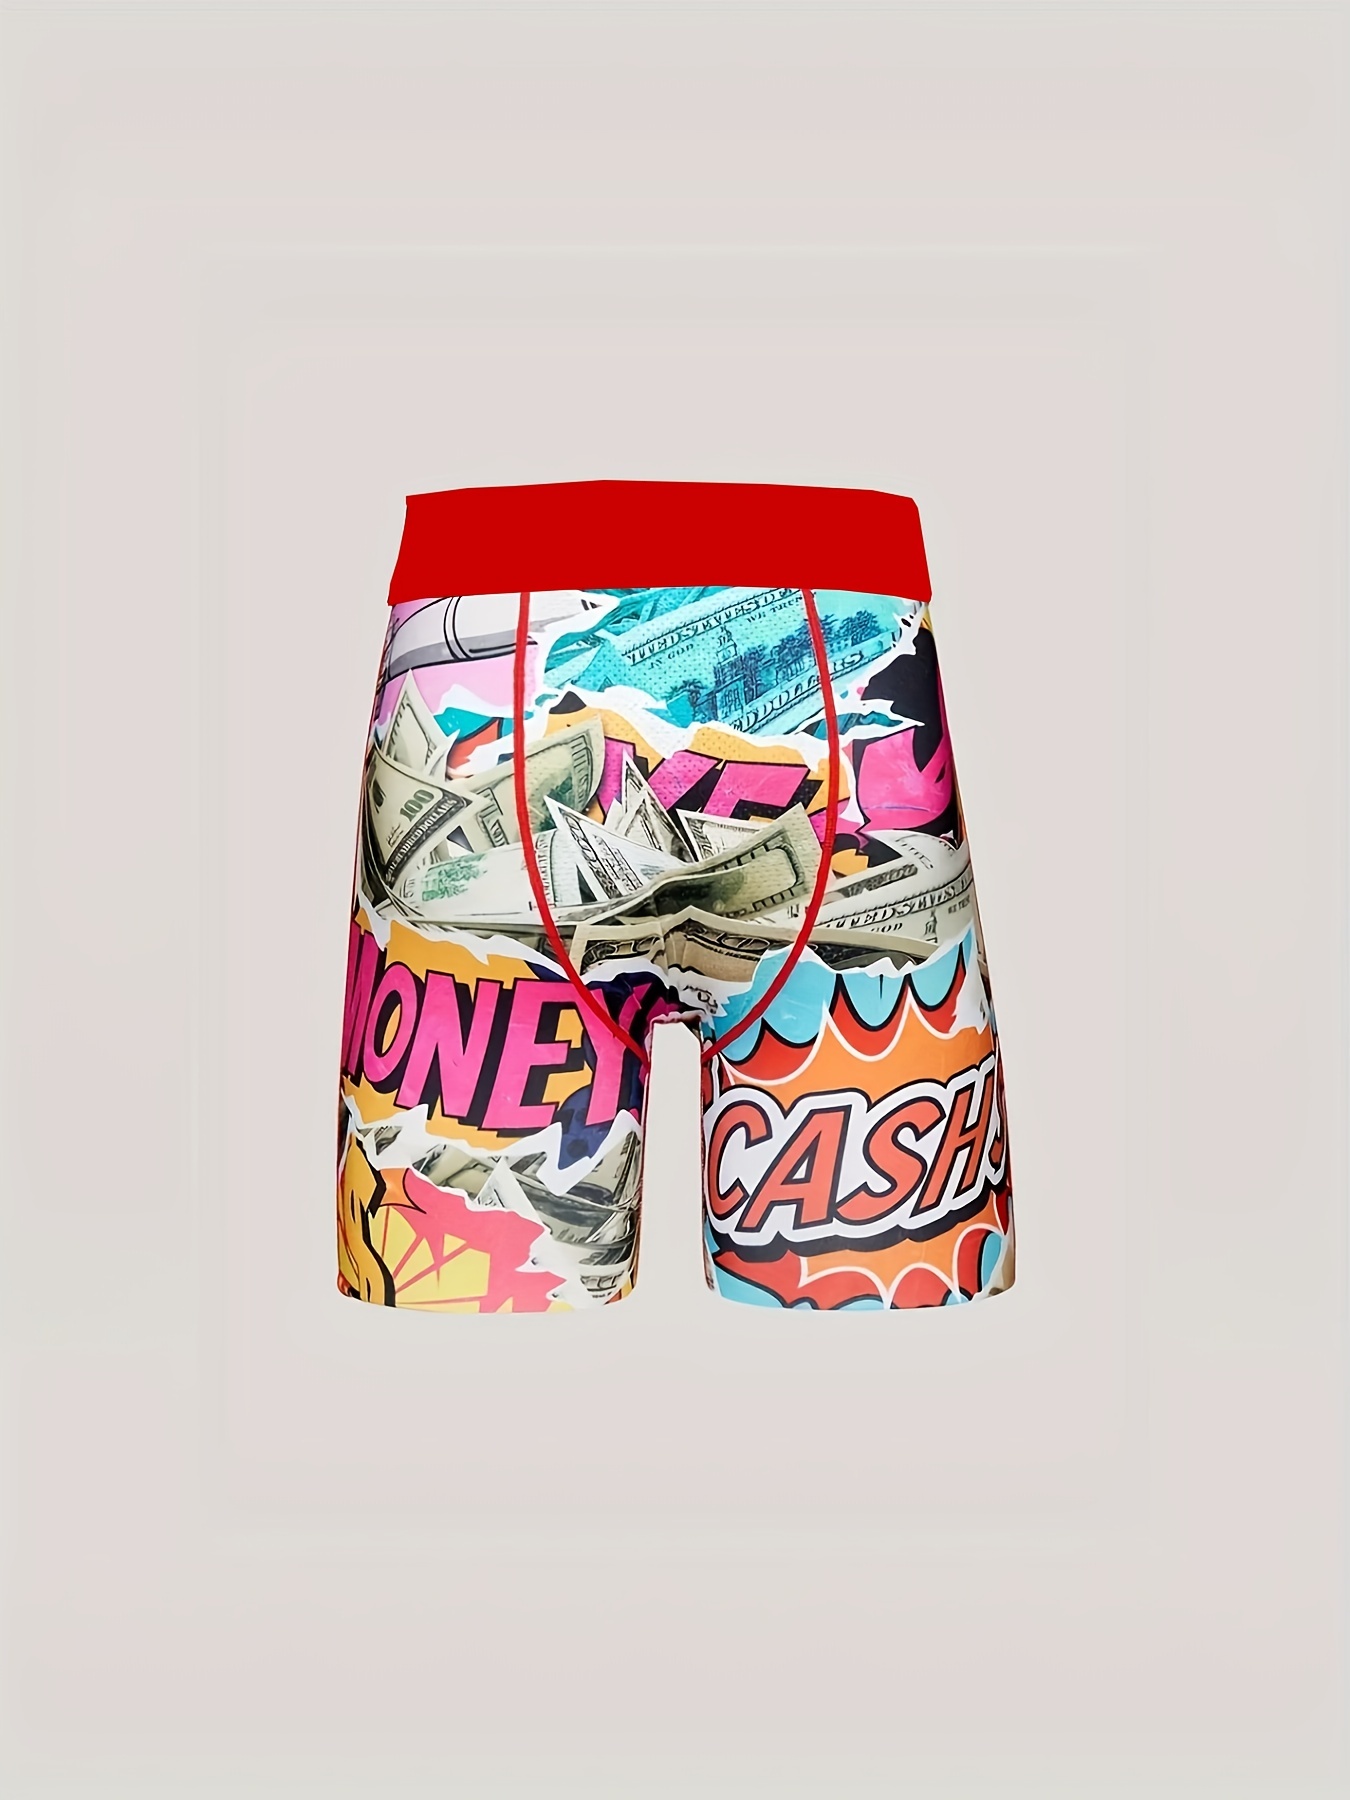 Men's Dollar Print Long Boxers Briefs Shorts, Breathable Comfy Stretchy  Quick Drying Sports Boxers Trunks, Men's Novelty Graphic Underwear